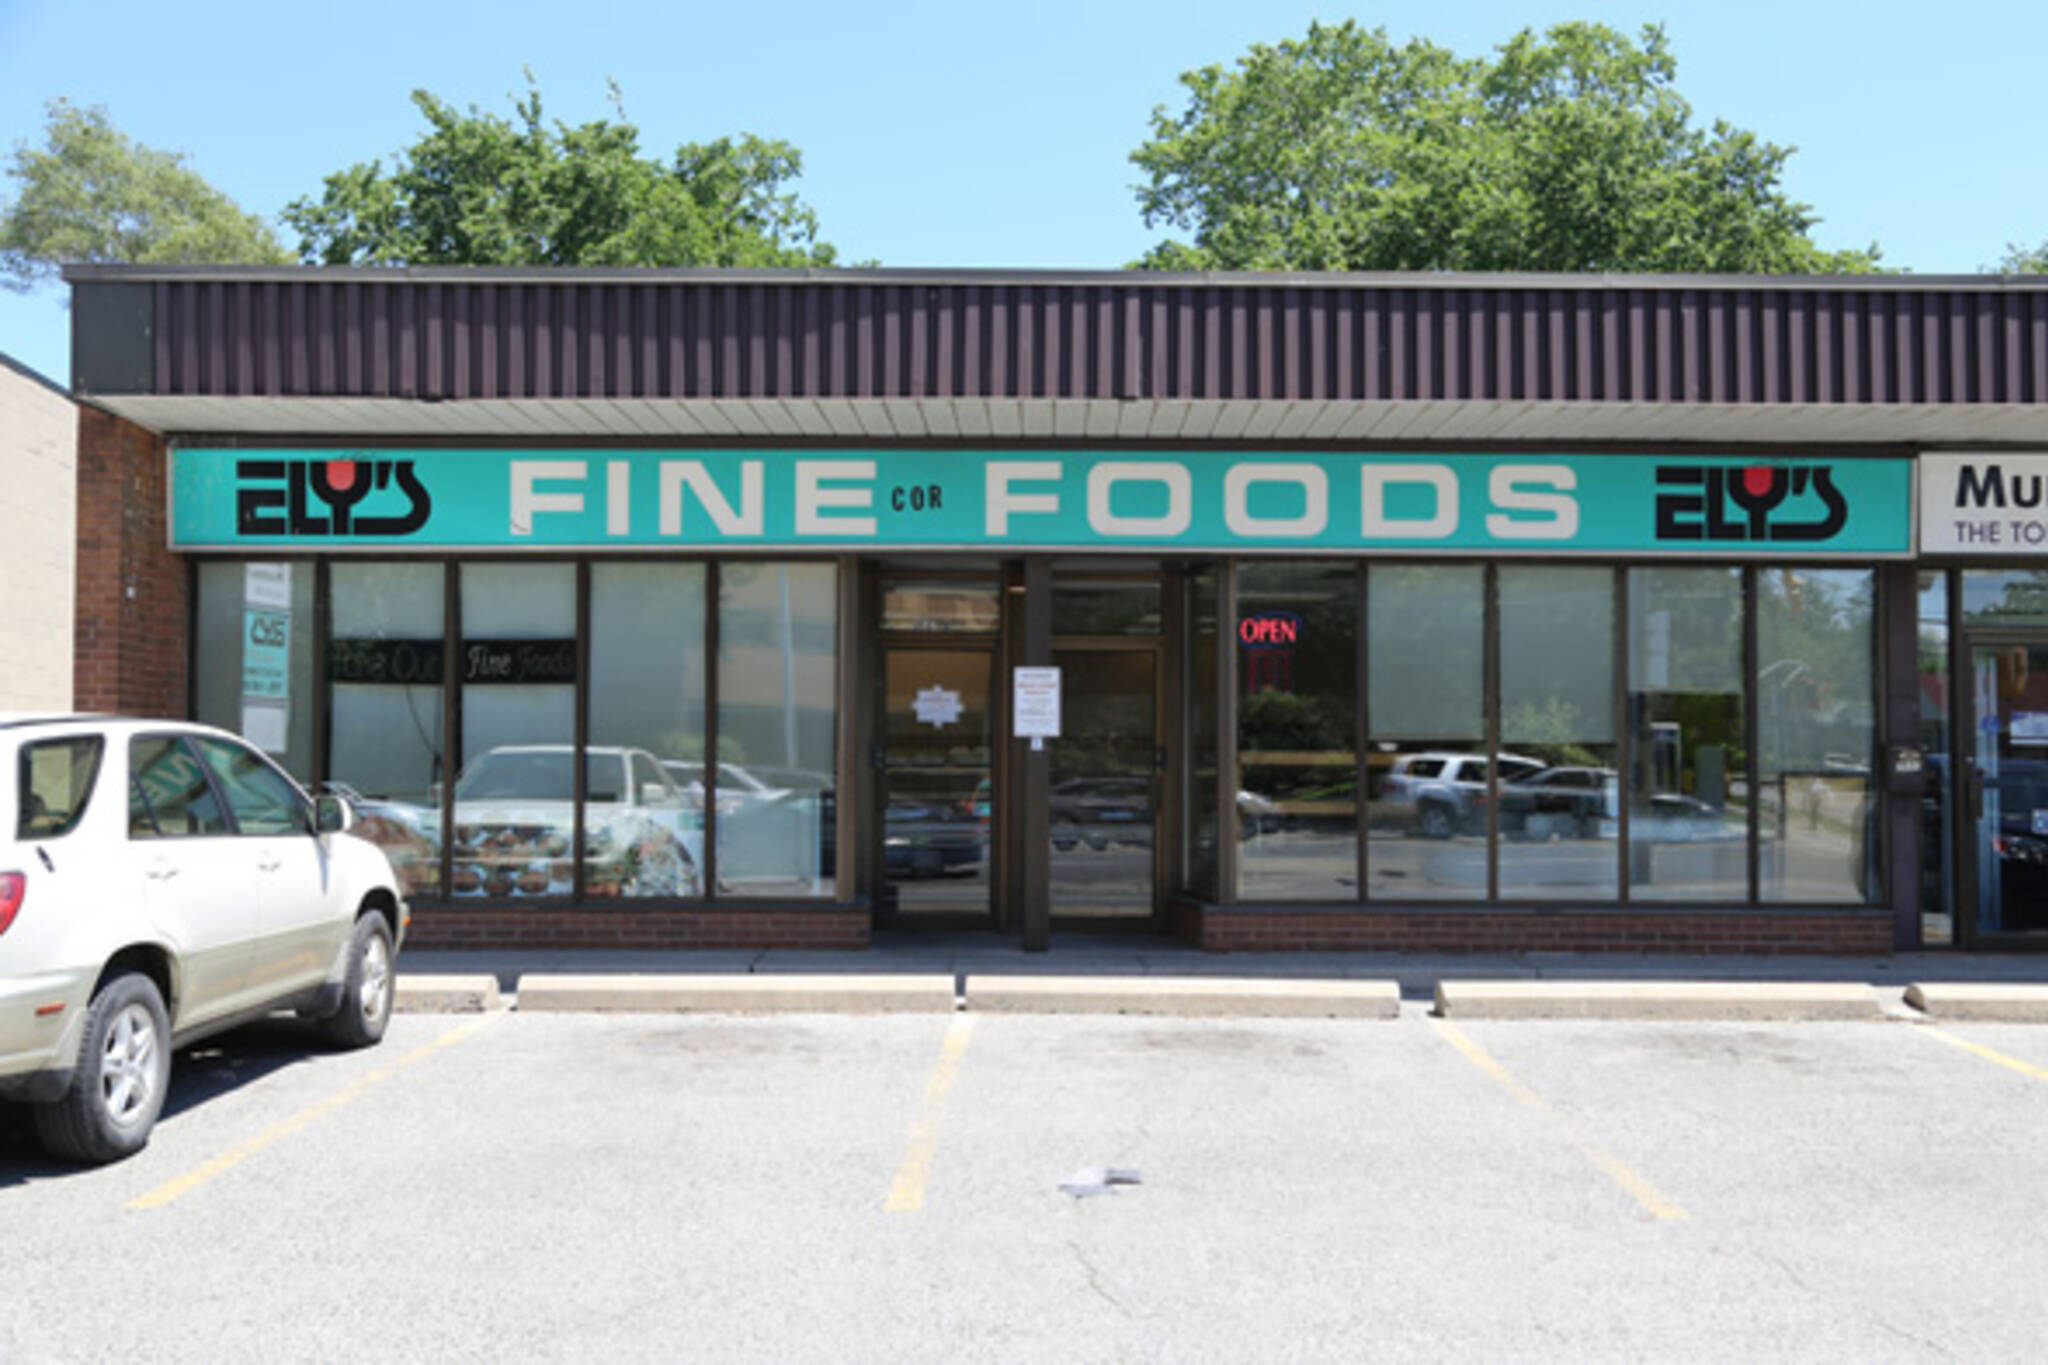 Ely's Fine Foods